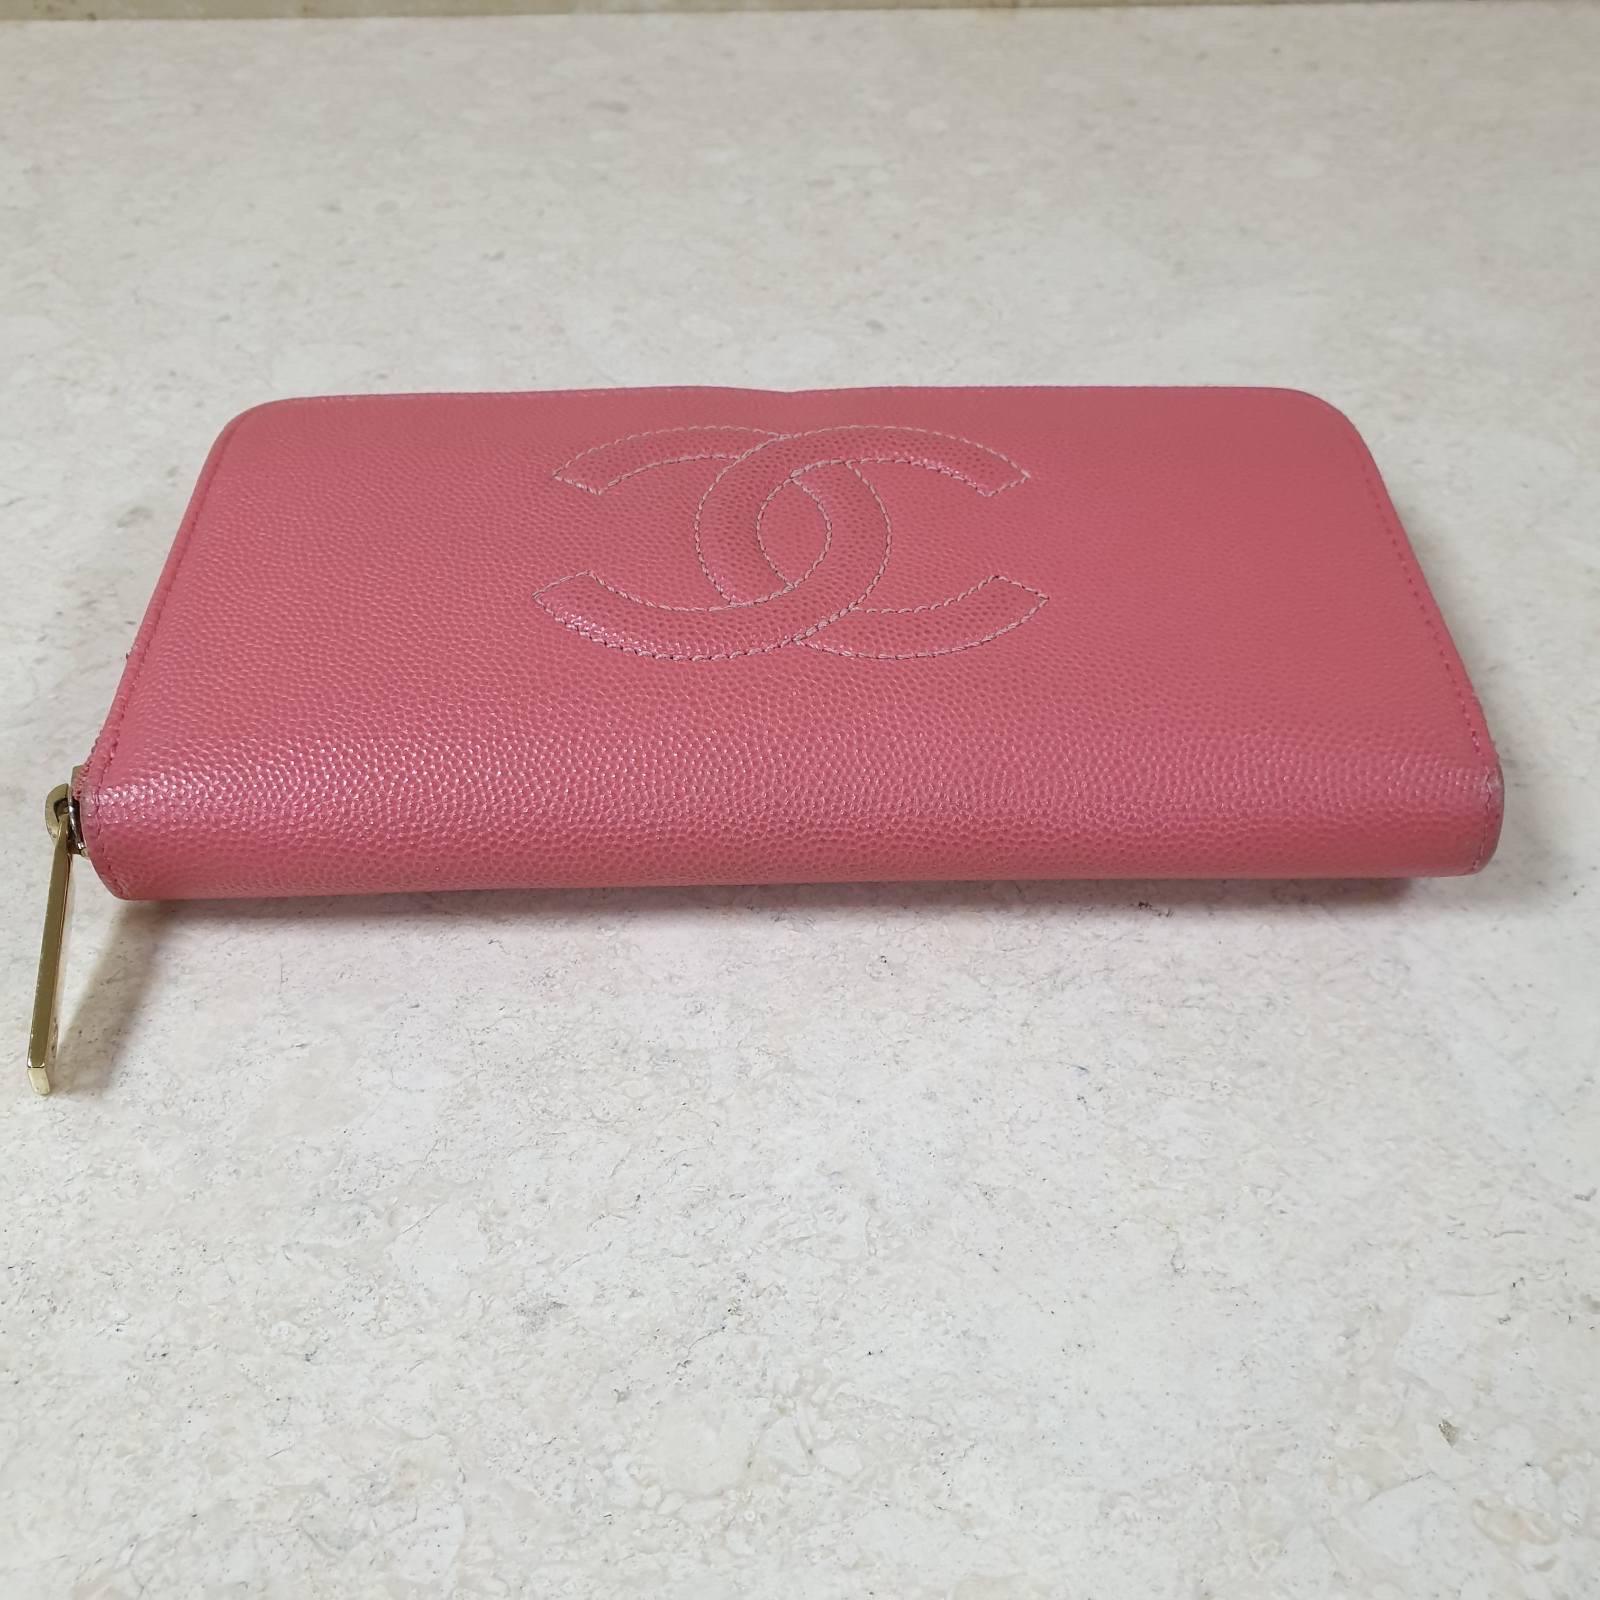 CHANEL Caviar Leather CC Zip Around Long Wallet 
Style:Long Wallet 
size:W7.6 x H3.8inch / W19.2cm x H9.7cm 
Material:Caviar Leather 
No box. No dust bag
Condition:good with signs of wear seen on pics.